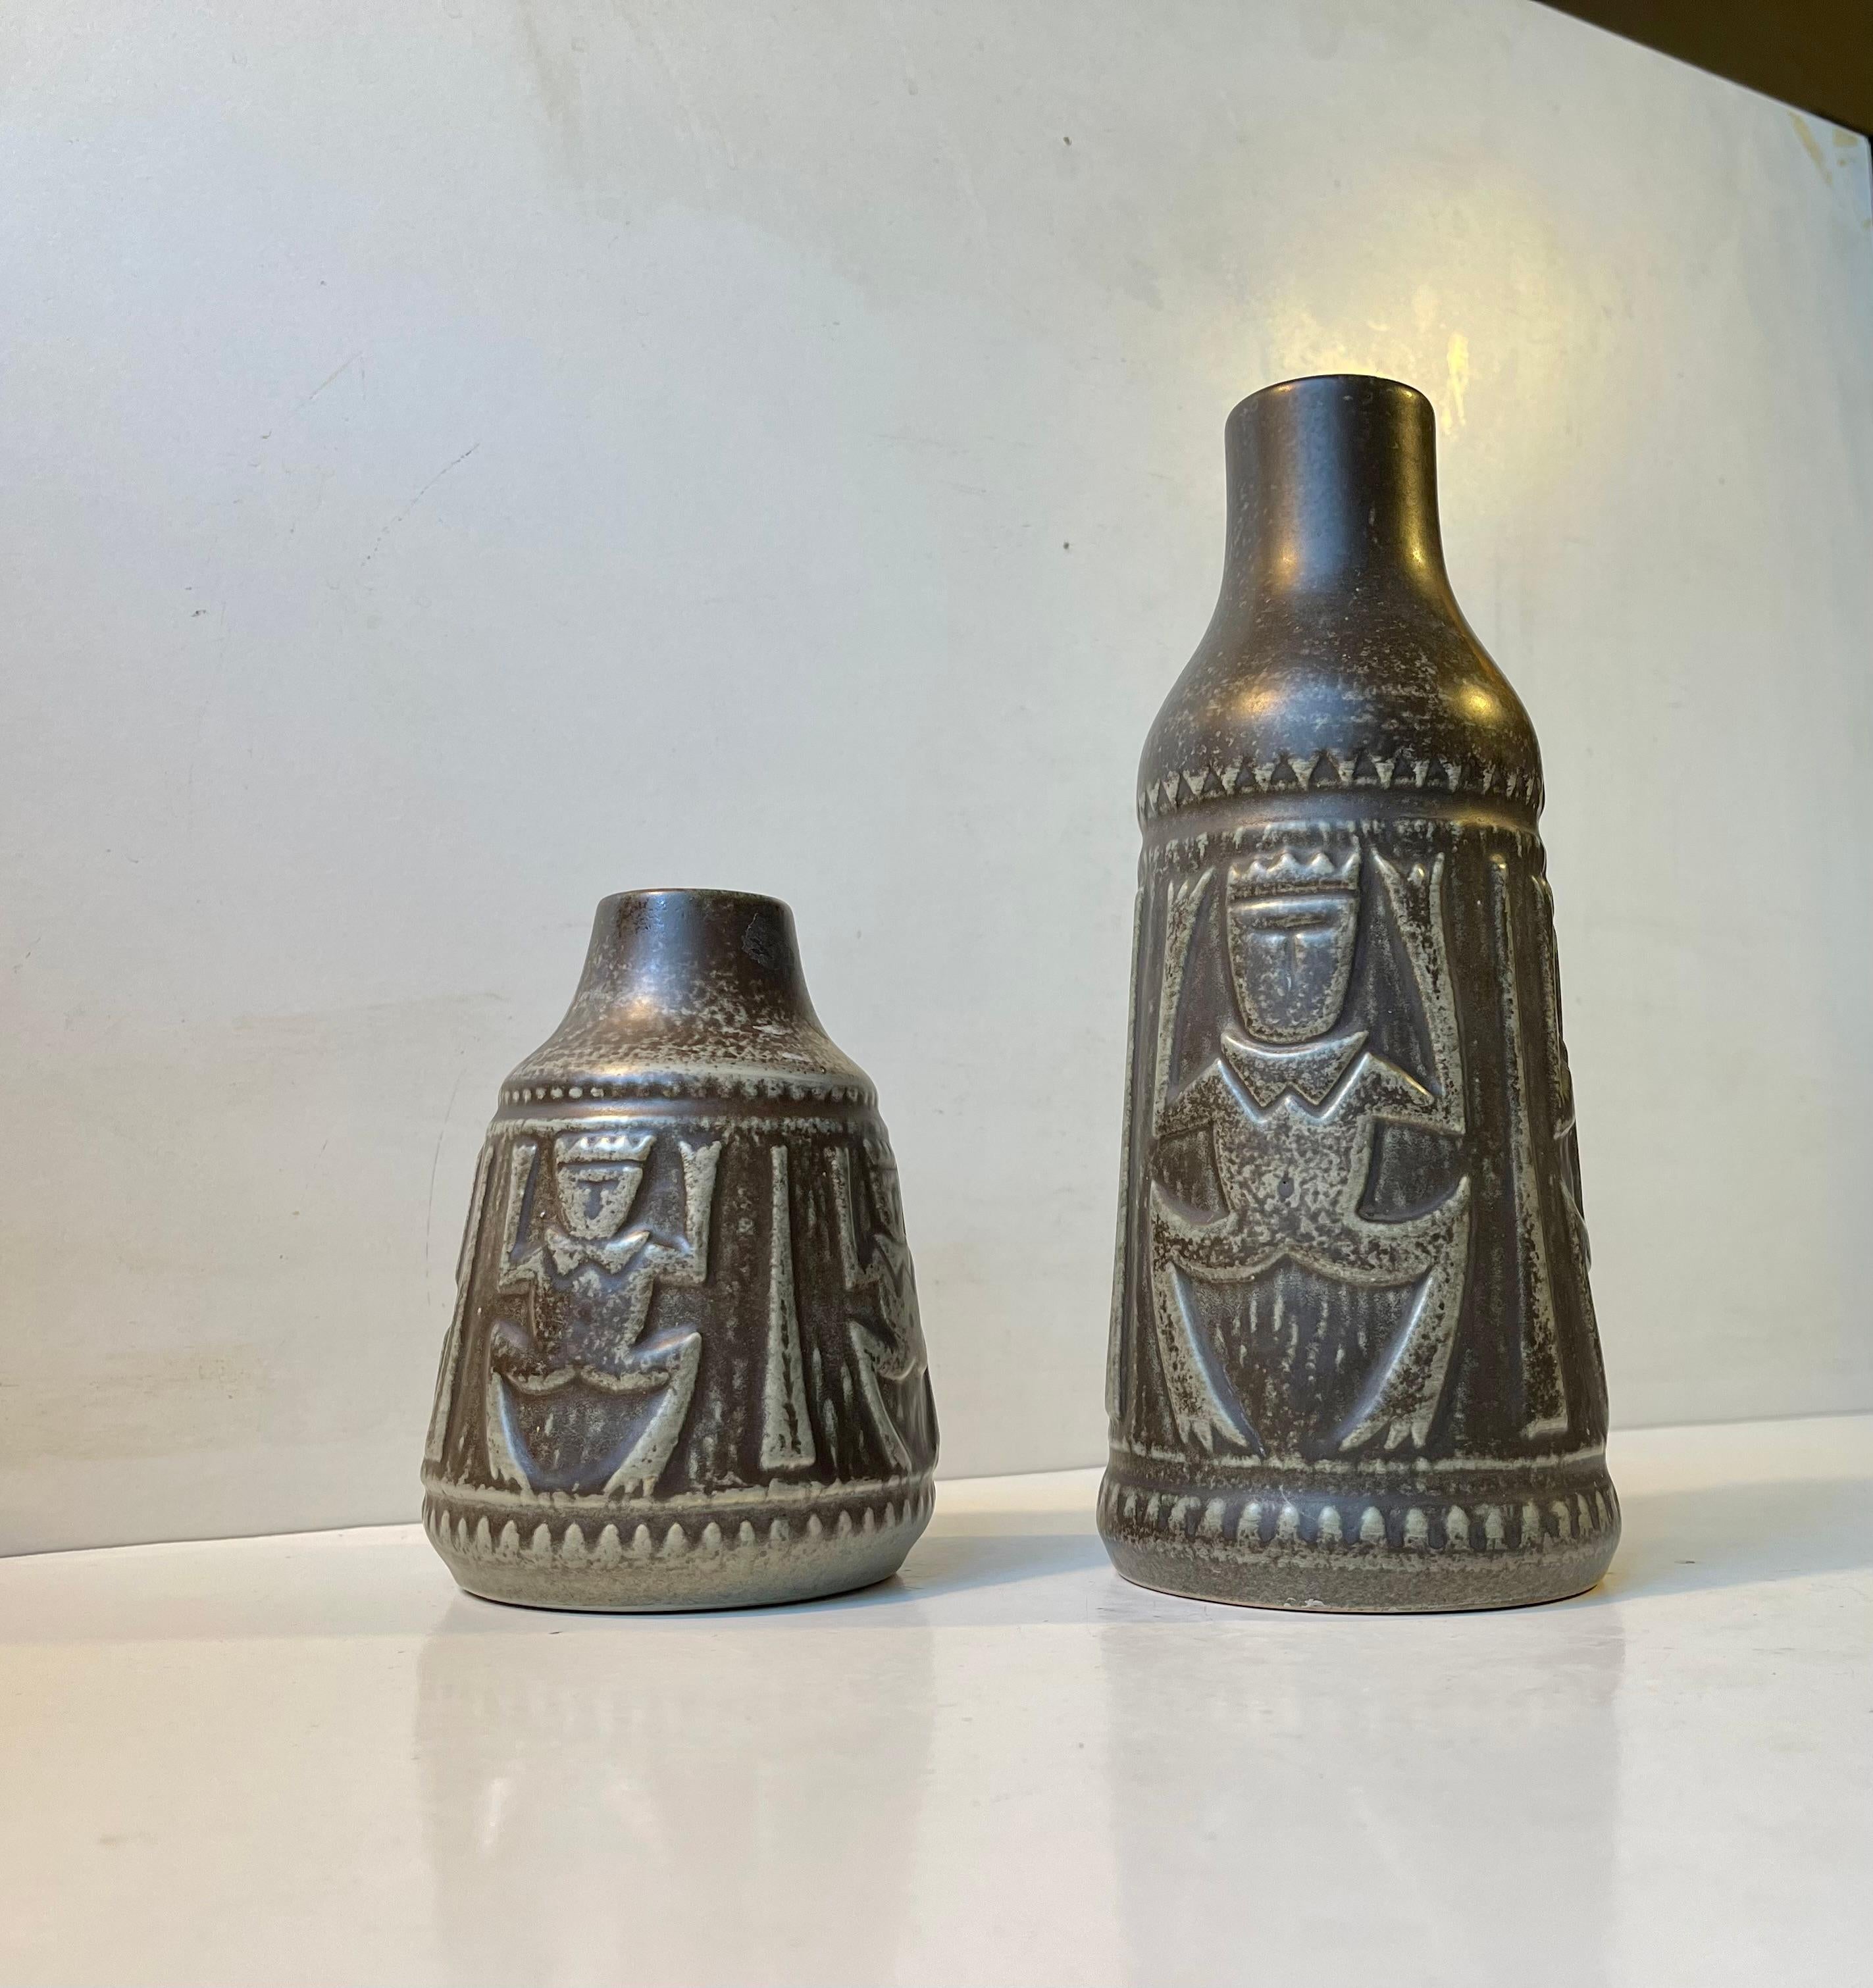 Ceramic vases with grey/brown/green'ish glaze and decorated with Bornholm trolls Designed and manufactured during the 1970s by Johgus on the Island of Bornholm in Denmark. Both signed. Measurements: H: 24/14 cm, D: 10/10 cm. The price is for both.